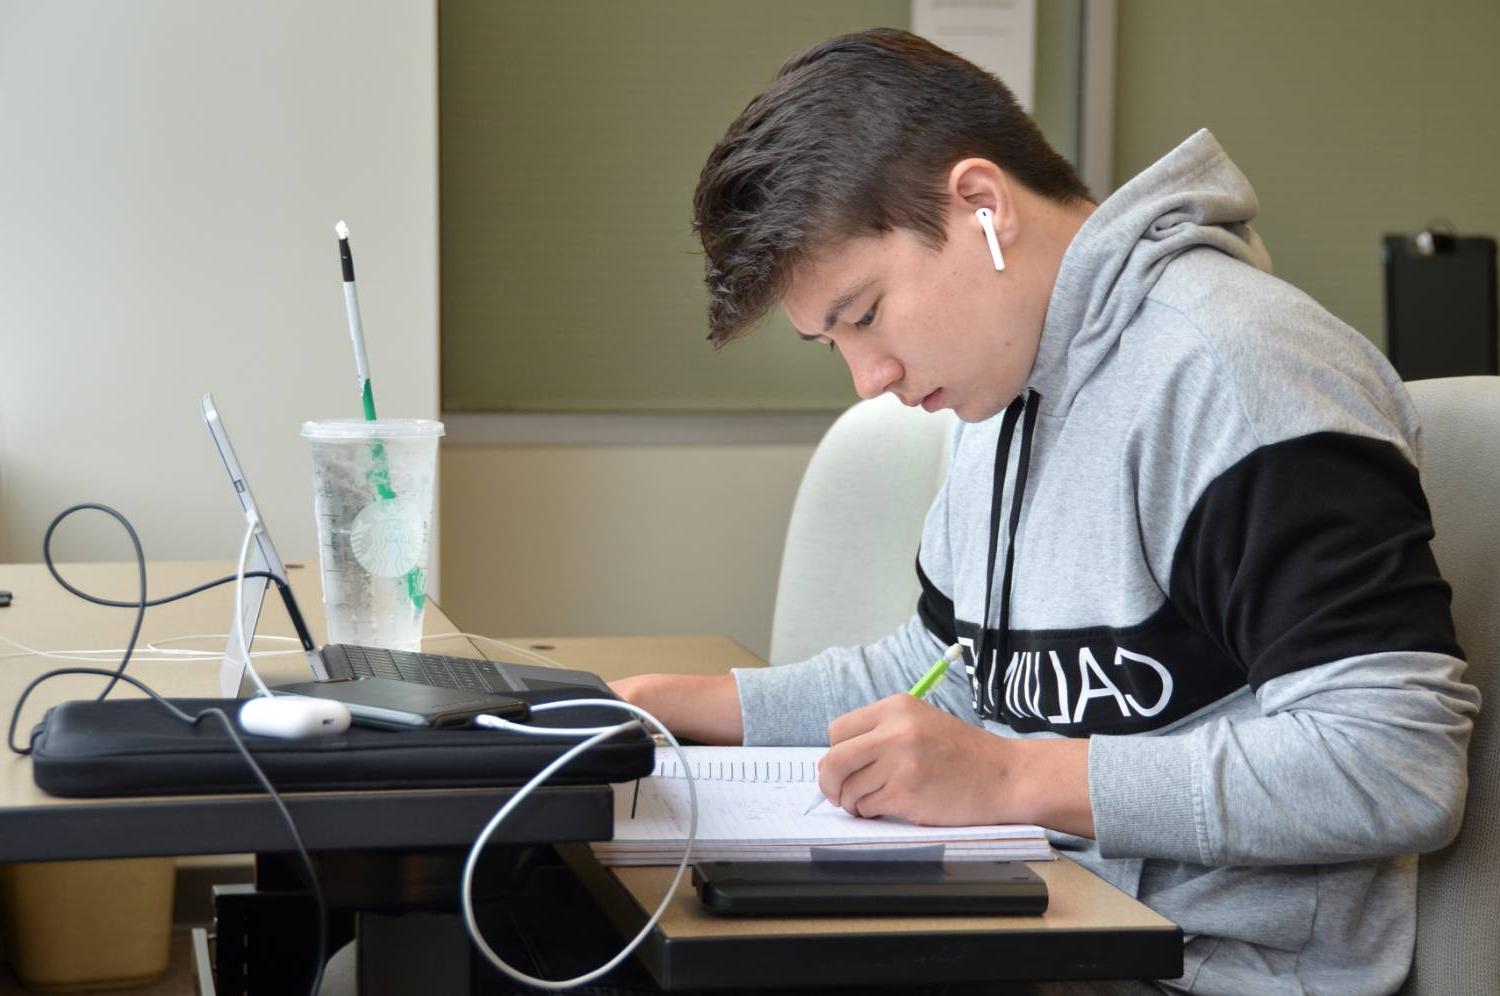 Student studying at desk with pencil, notebook, and computer